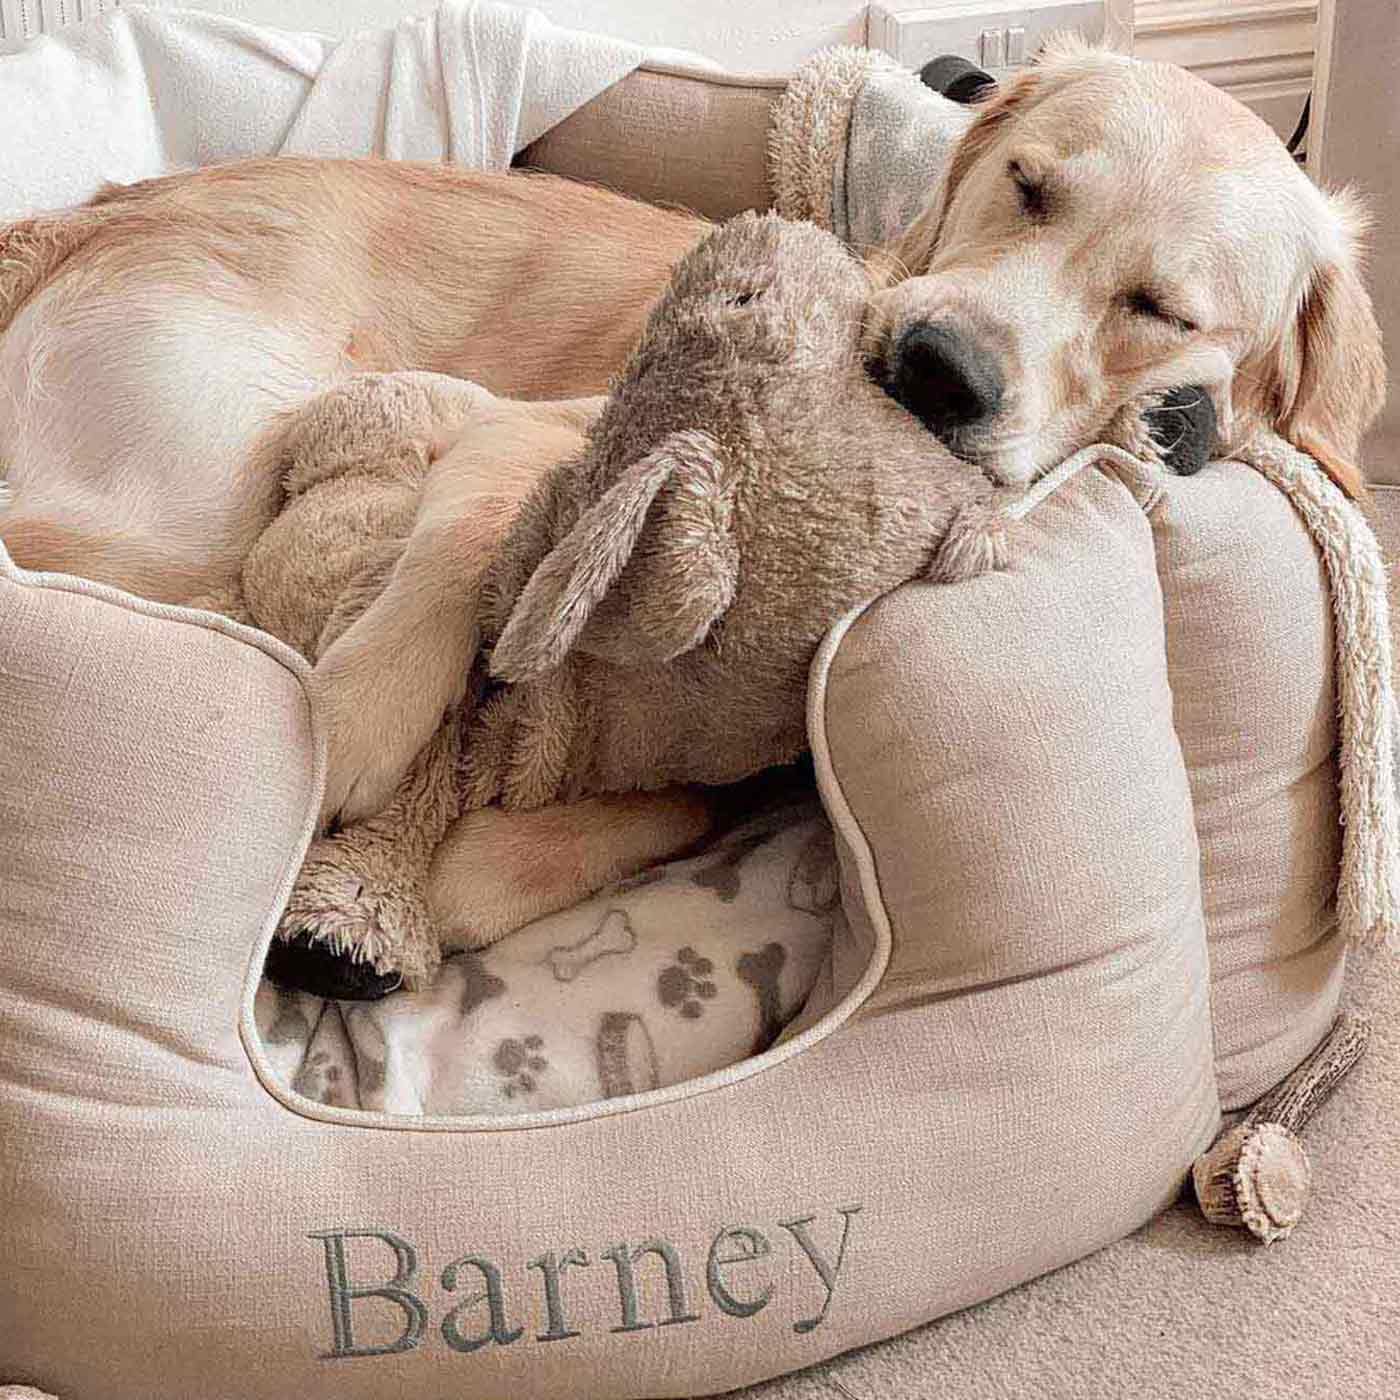 Discover Our Luxurious High Wall Bed For Dogs, Featuring inner pillow with plush teddy fleece on one side To Craft The Perfect Dogs Bed In Stunning Savanna Oatmeal! Available To Personalize Now at Lords & Labradors US